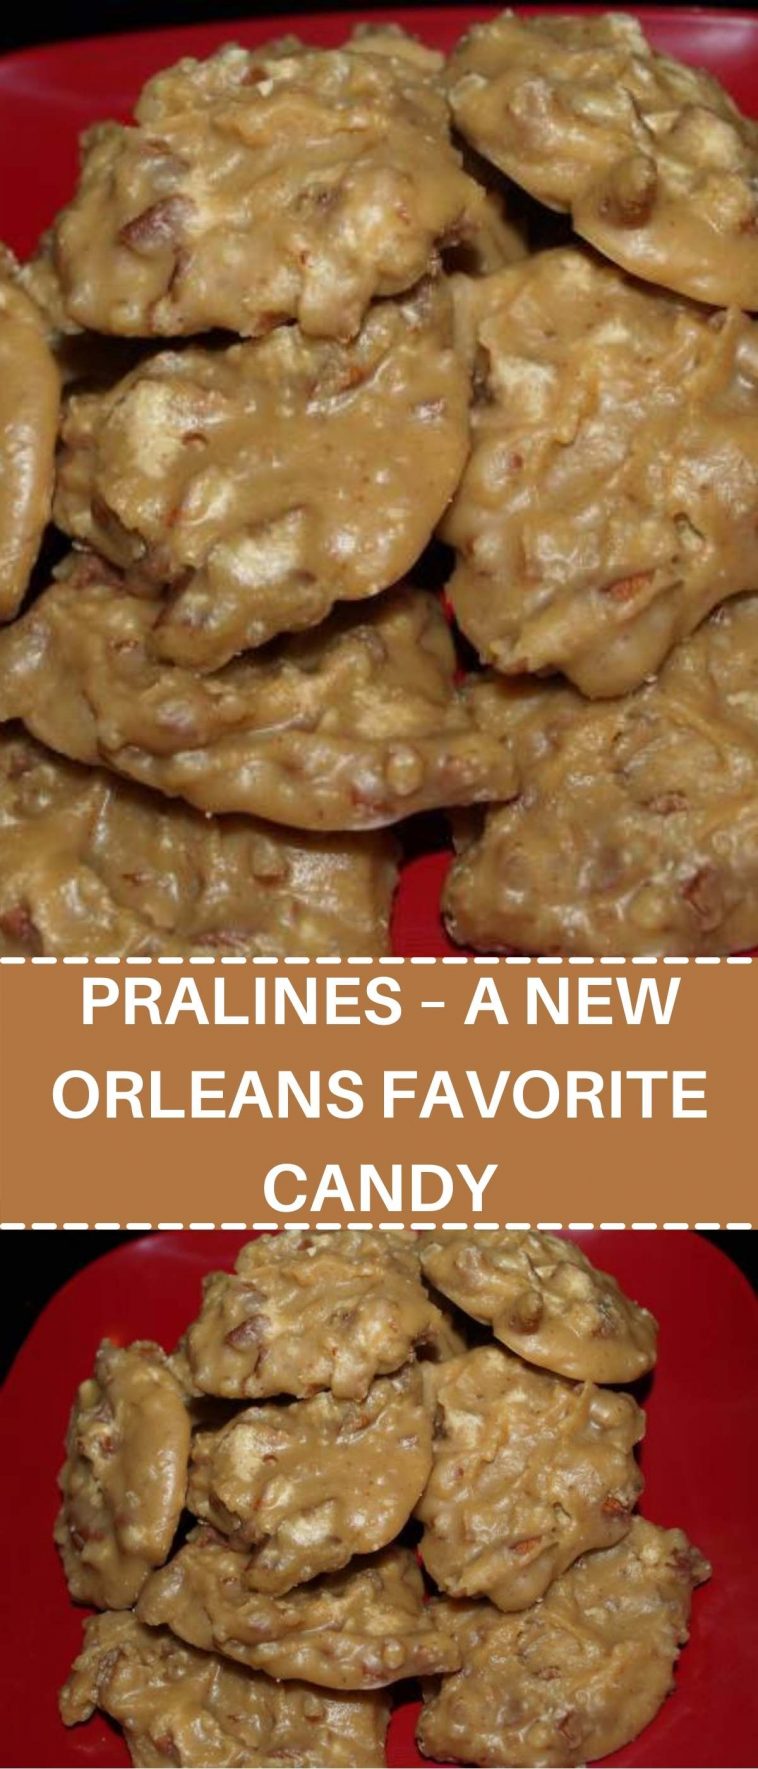 PRALINES – A NEW ORLEANS FAVORITE CANDY